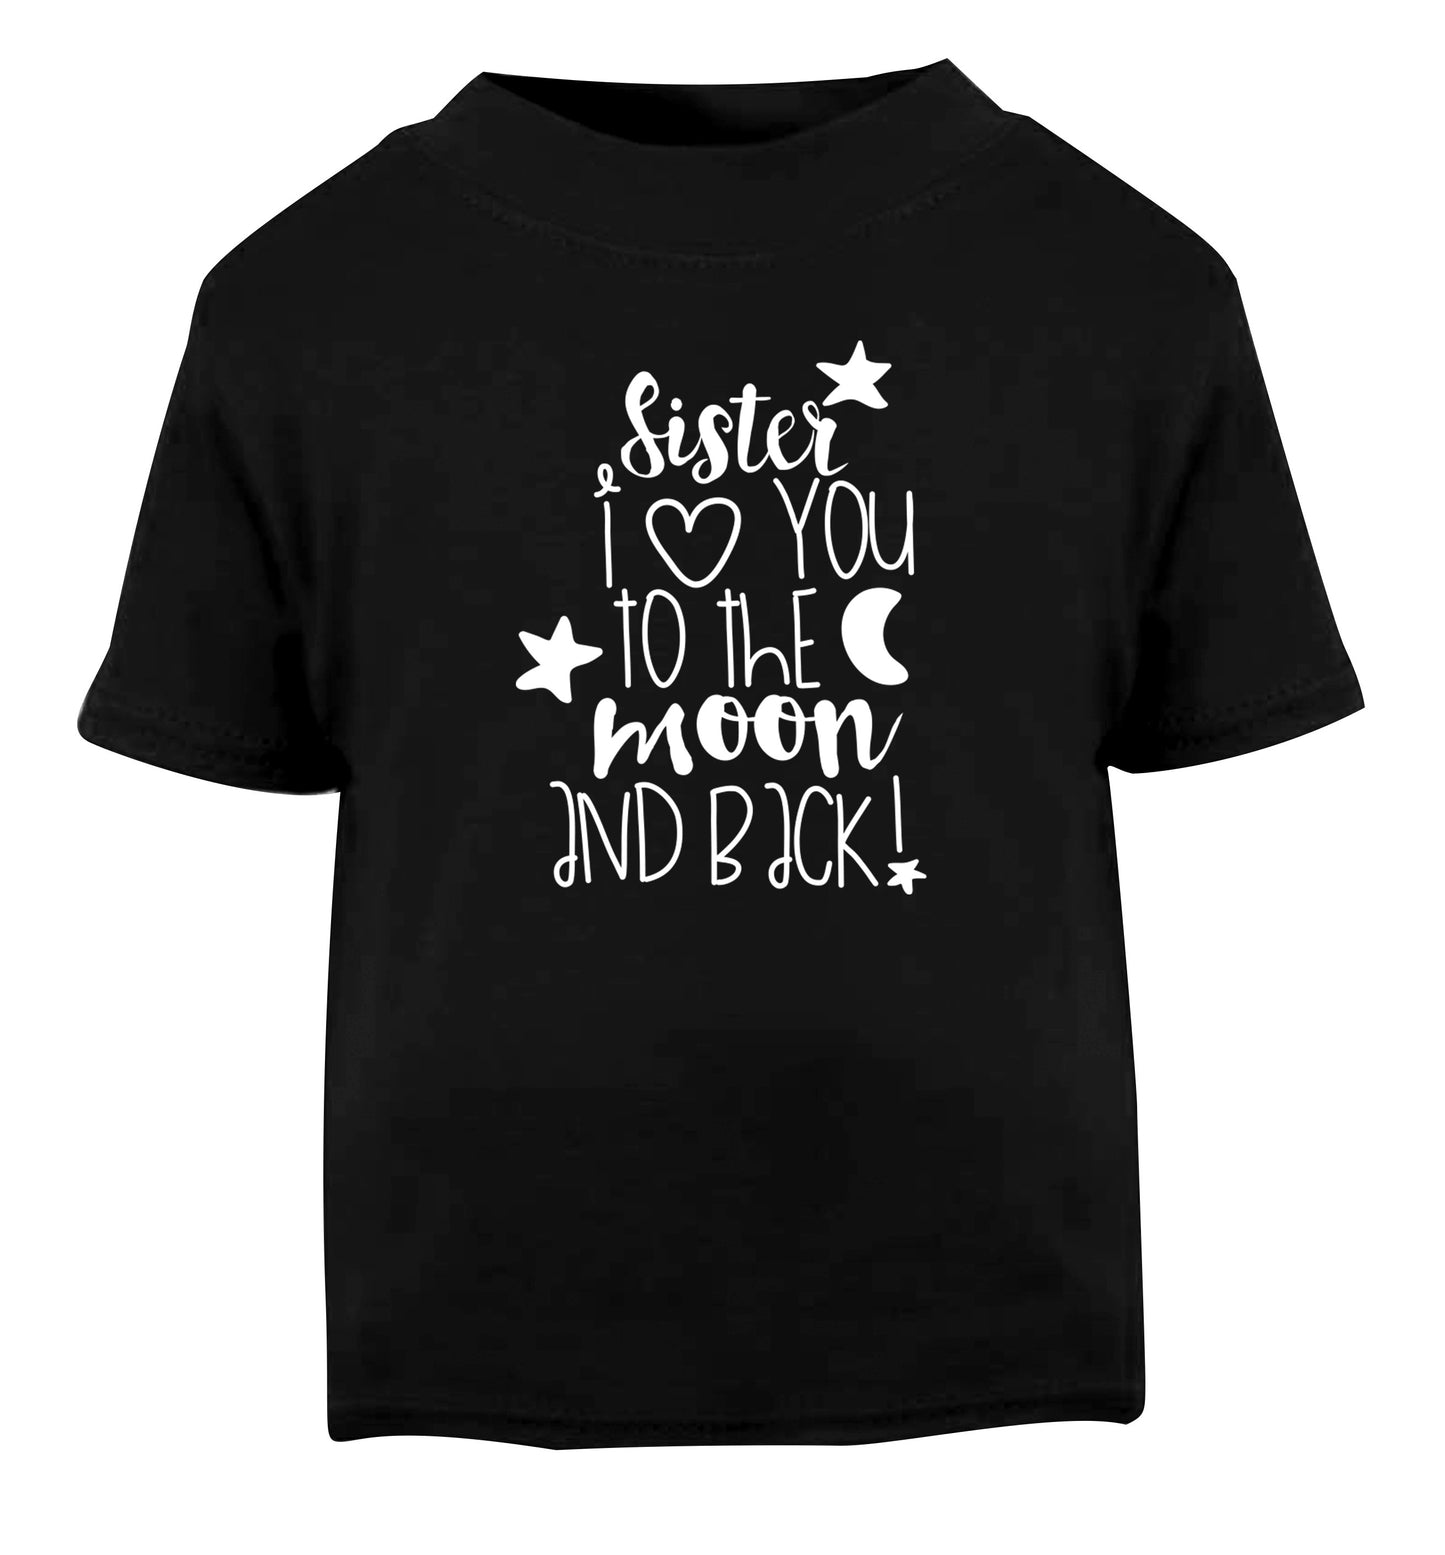 Sister I love you to the moon and back Black Baby Toddler Tshirt 2 years